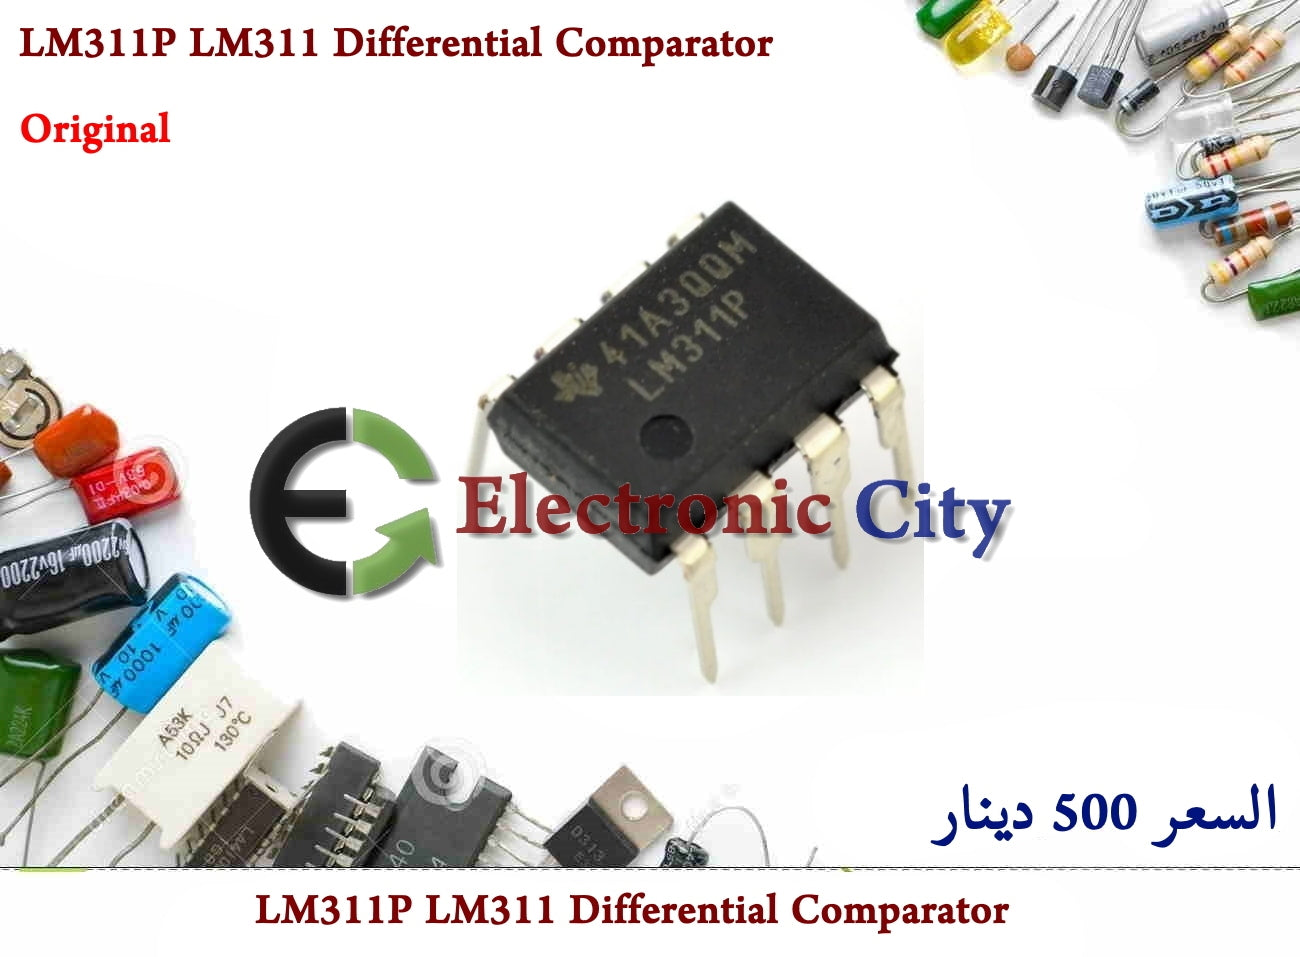 LM311P LM311 Differential Comparator